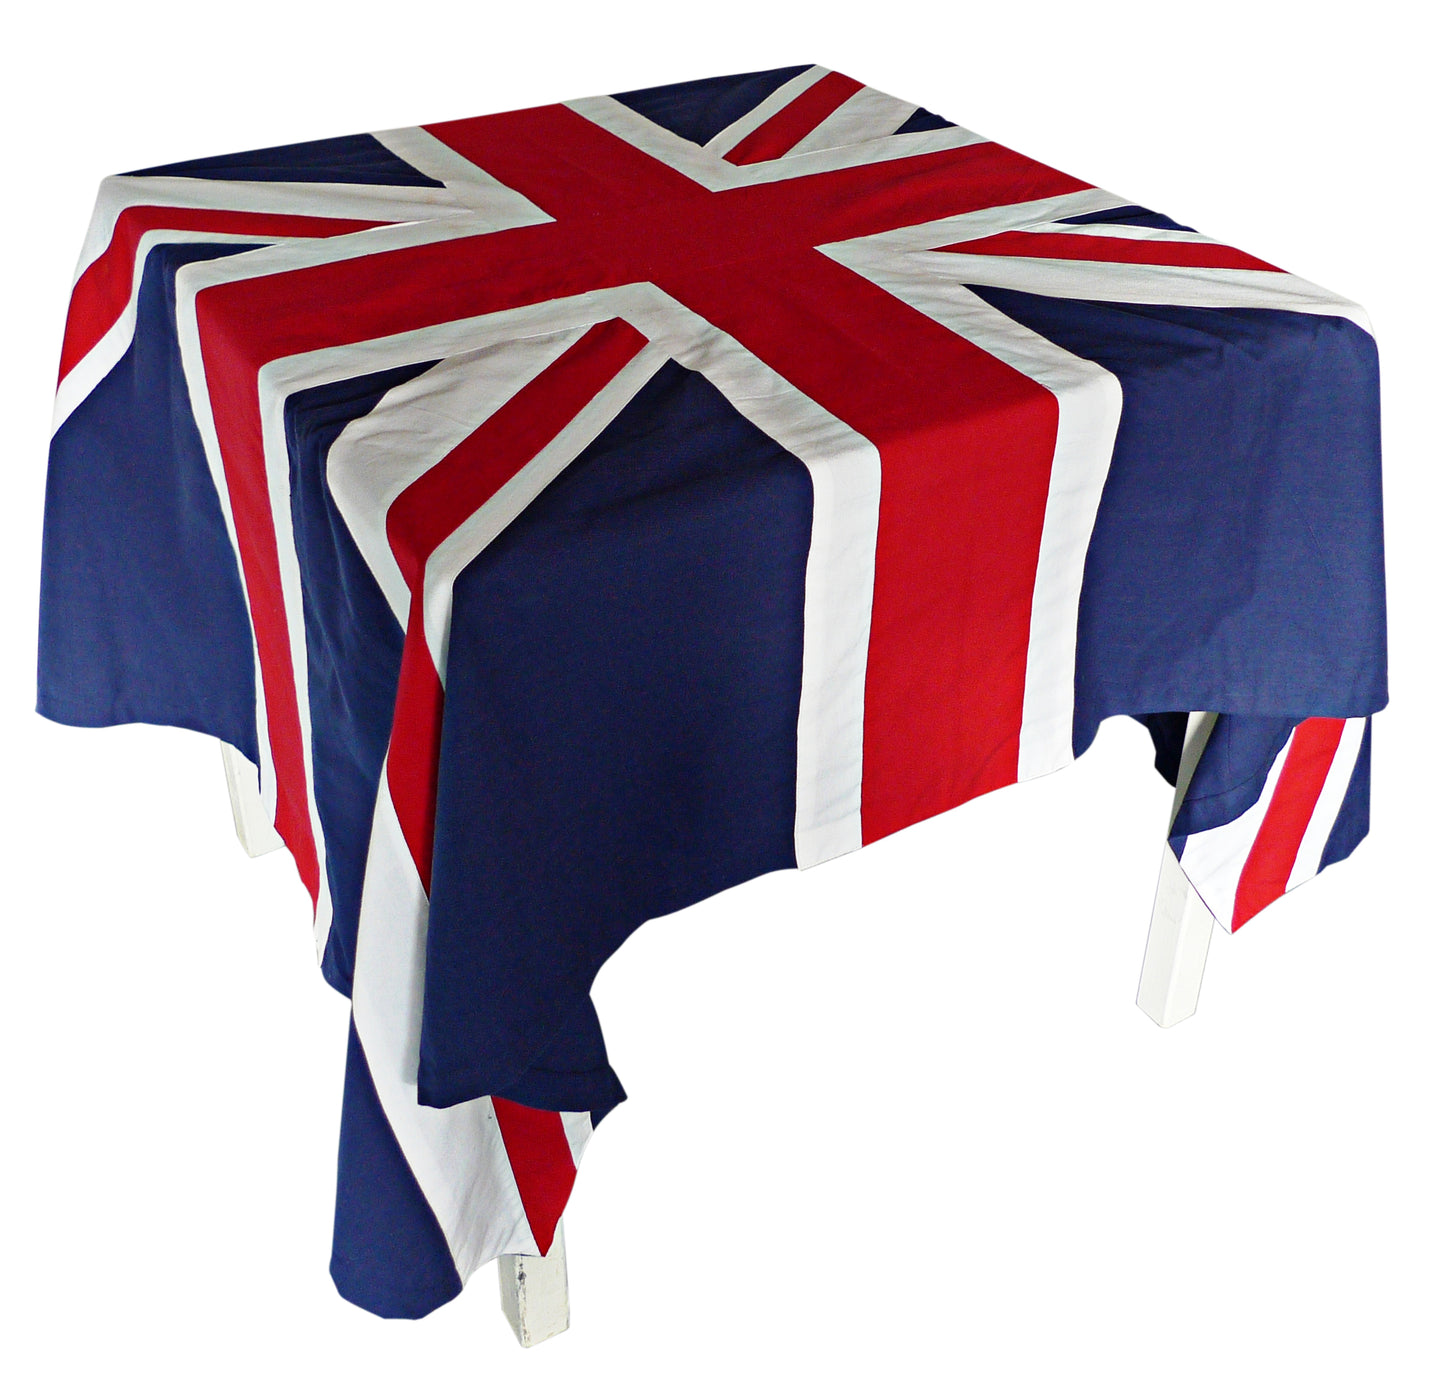 union jack tablecloth from sterck & co. made from 100% cotton with an appliqué layered process .